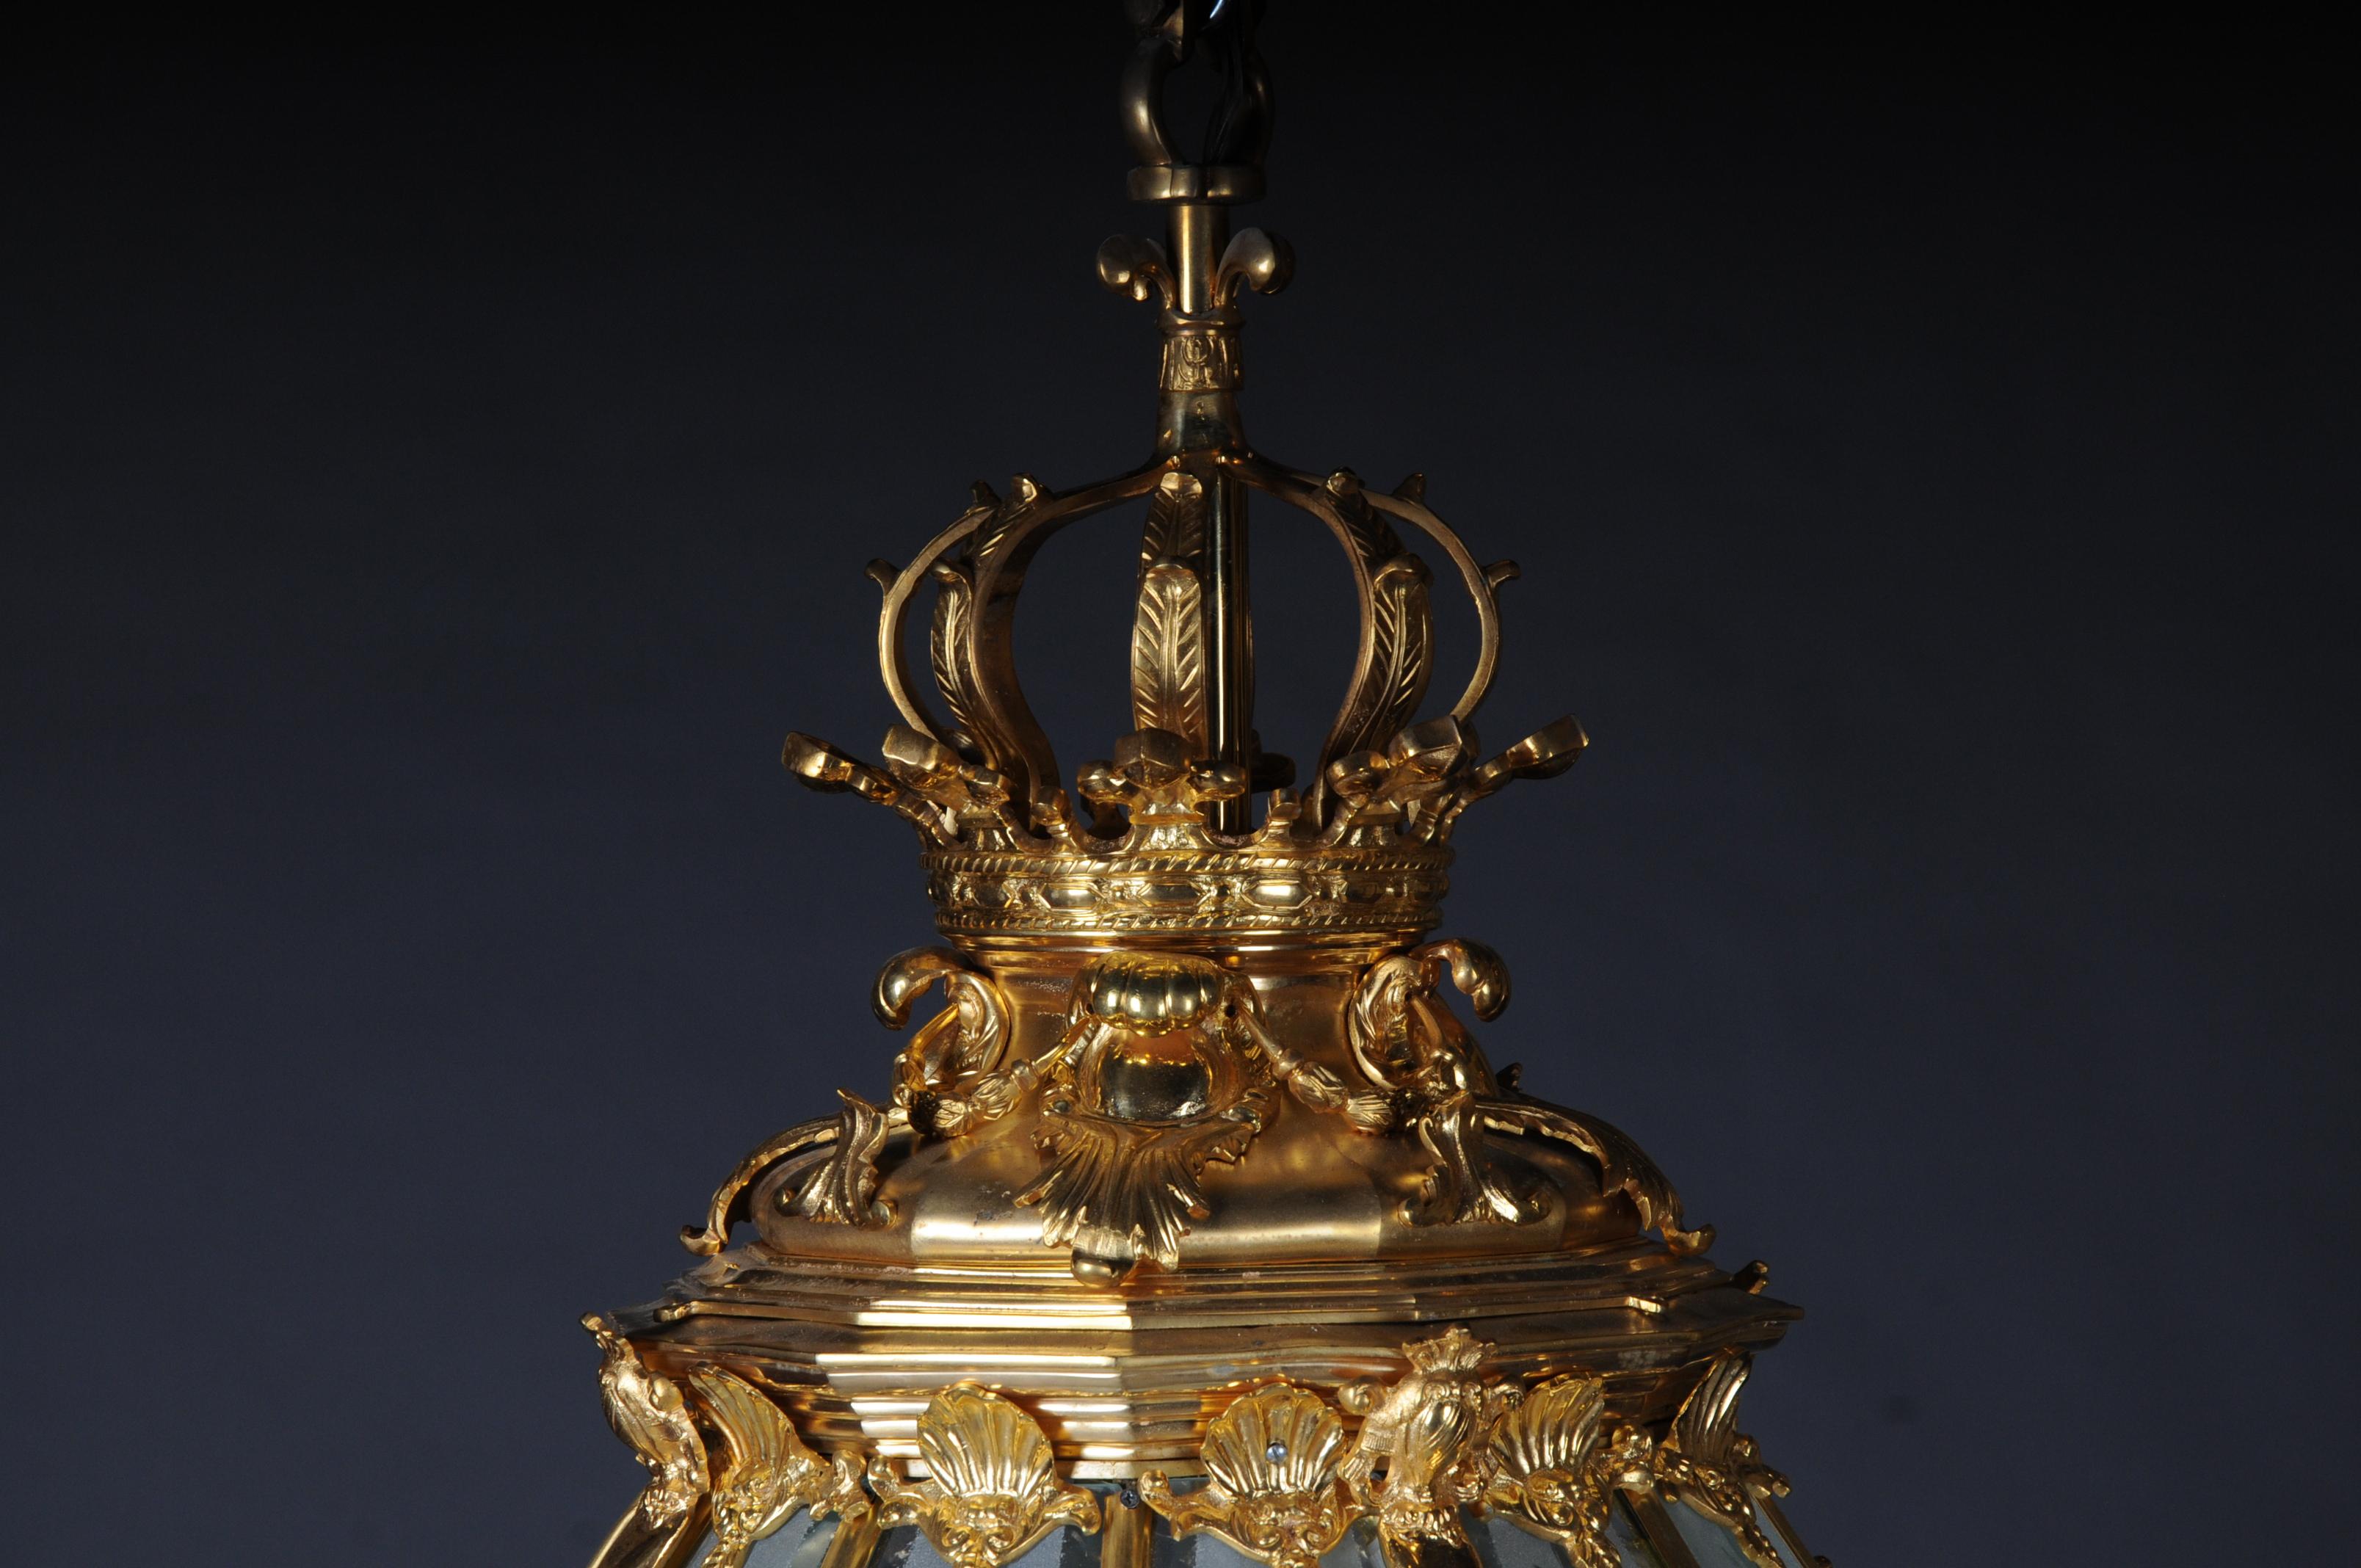 This exquisite lantern takes an octagonal beehive shape, which is often referred to as 'Versailles' shape, as it was based on an 18th Century model built for the Chateau of Versailles. The frame of the lantern is formed in ormolu, and the upper